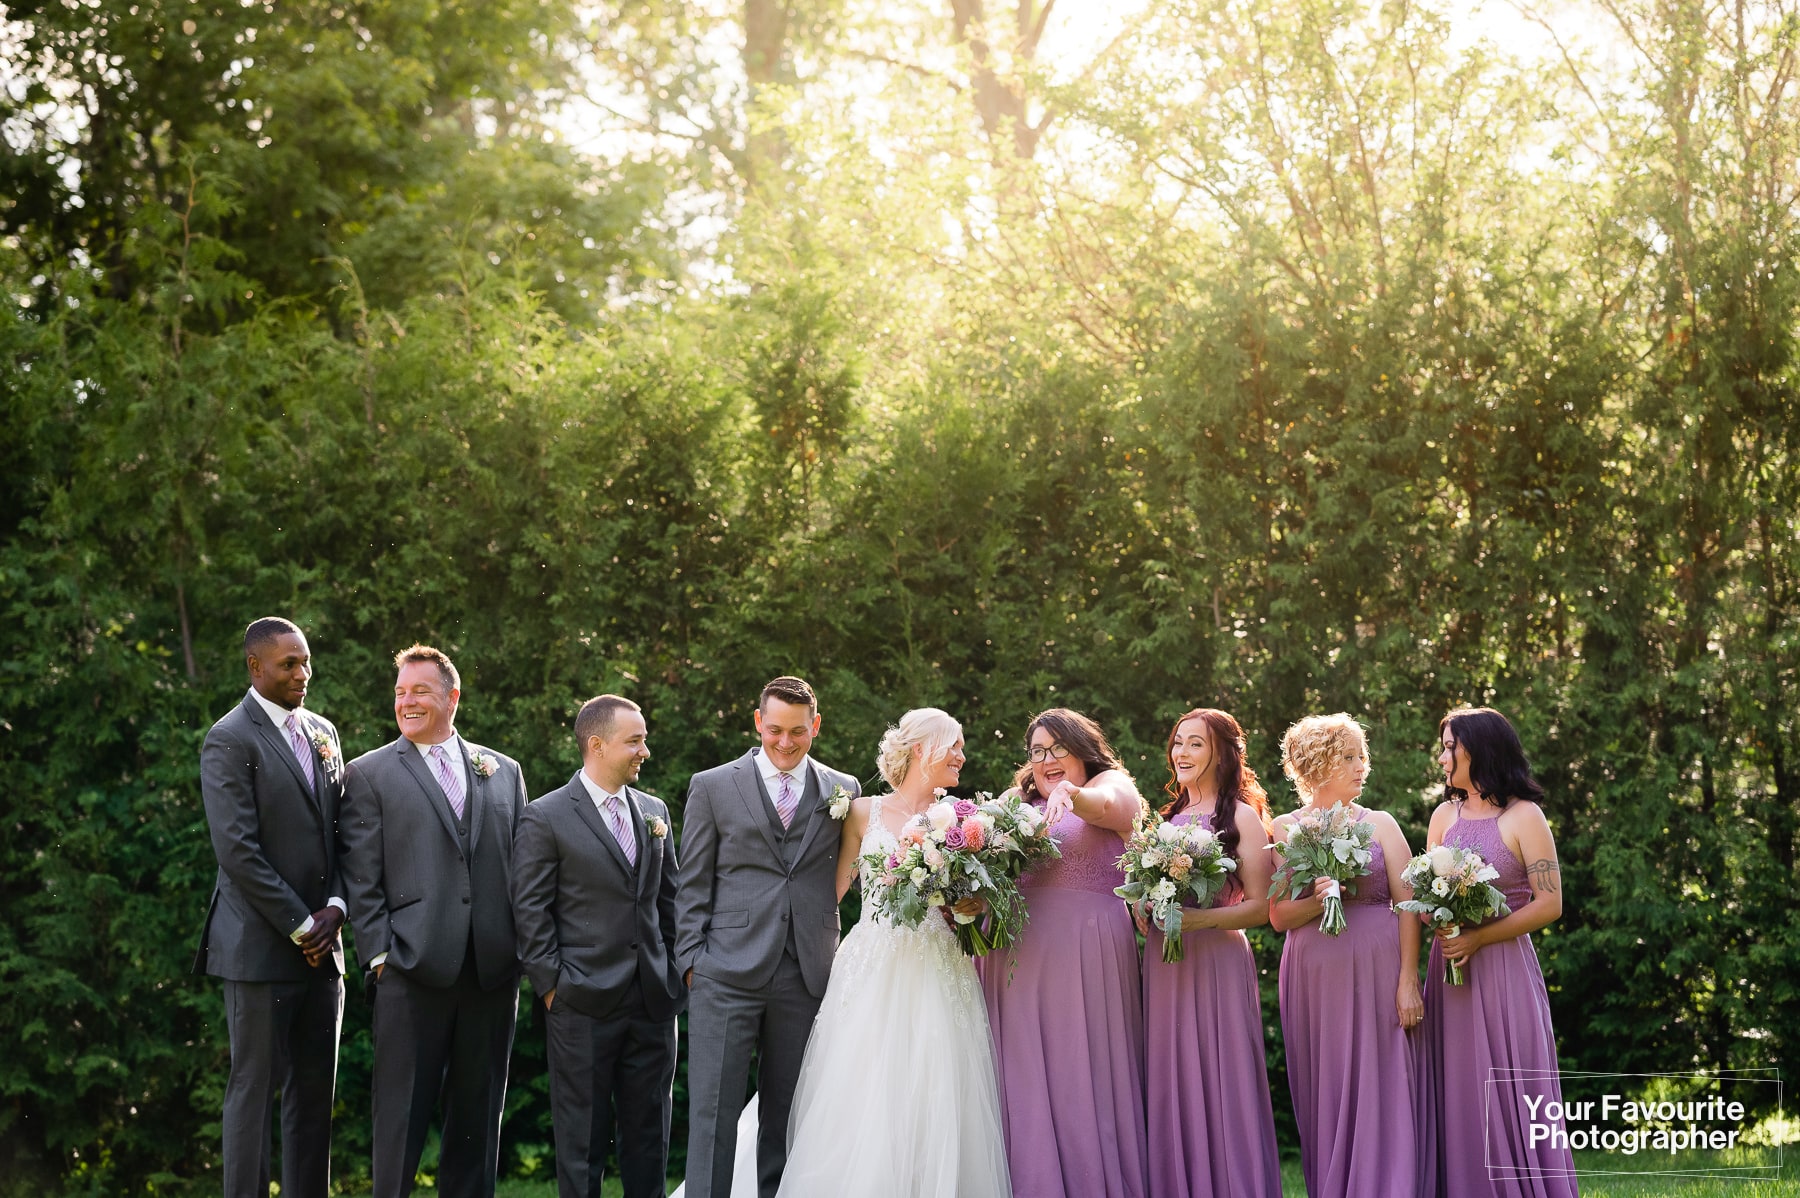 Candid group photo of wedding party outdoors in nature